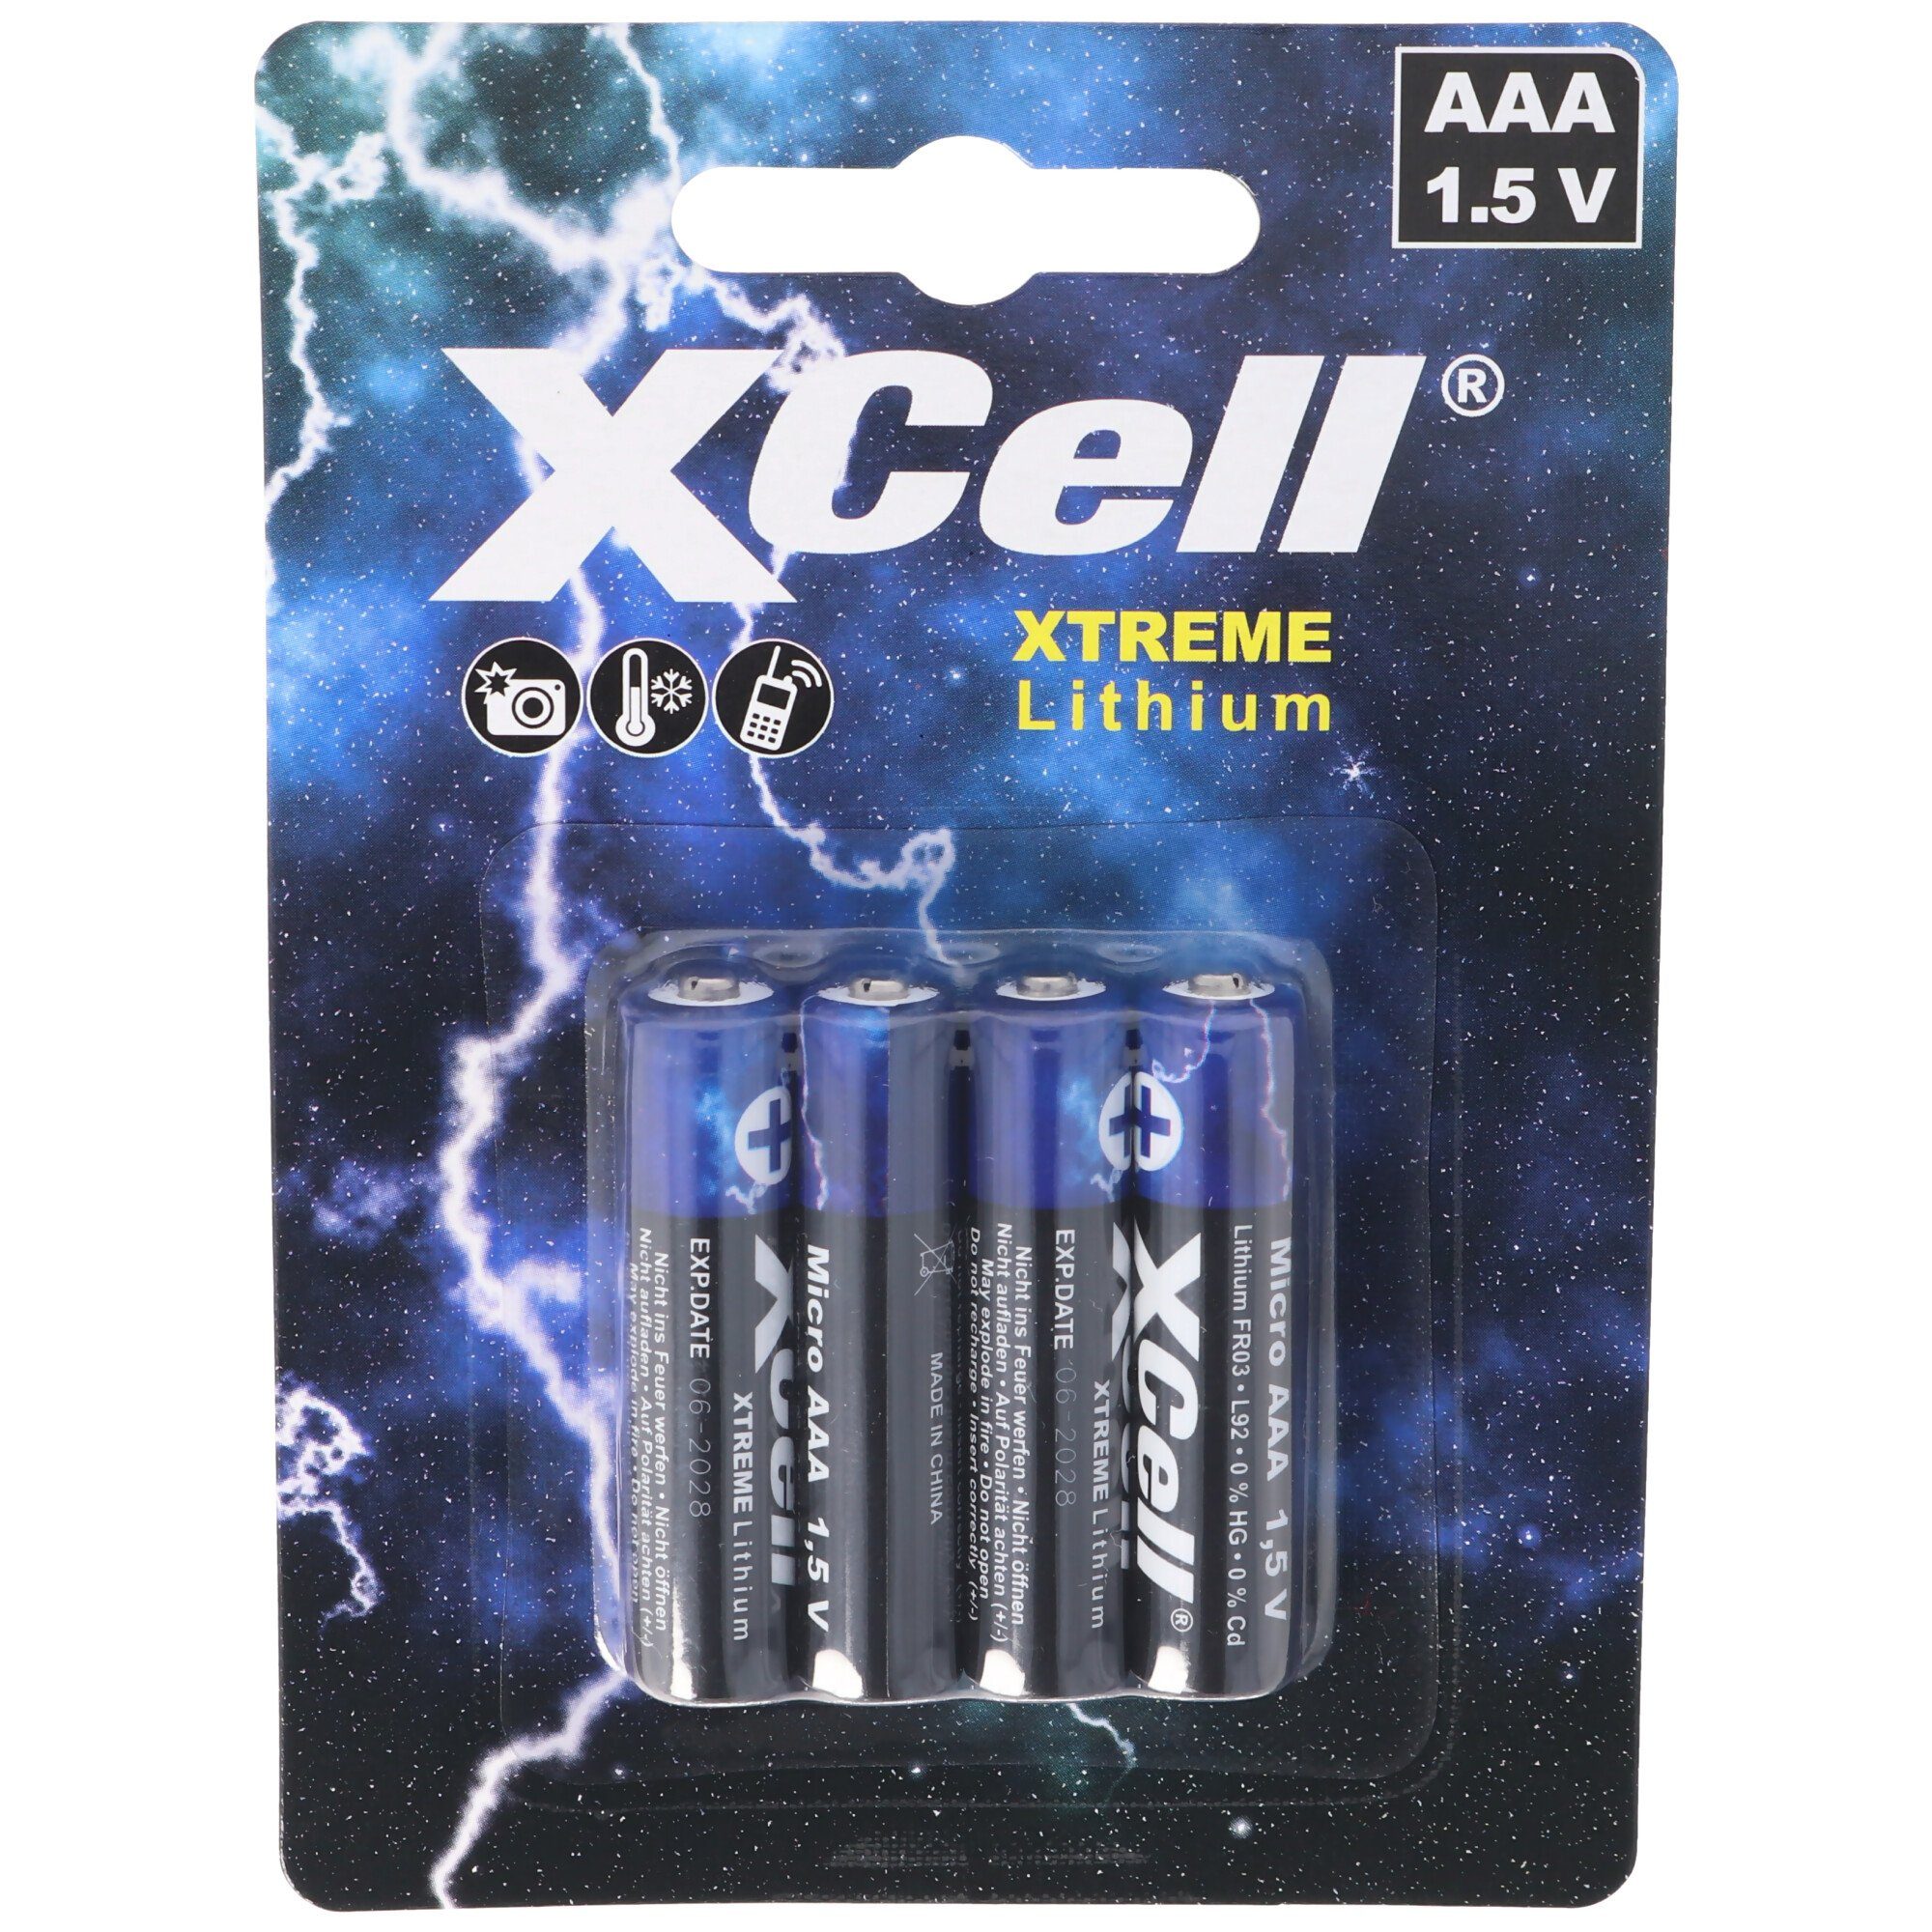 XCell AAA, Micro Lithium Batterie, XTREME Lithium Batterie FR03, L92 1,5V 4 Batterie, (1,5 V)